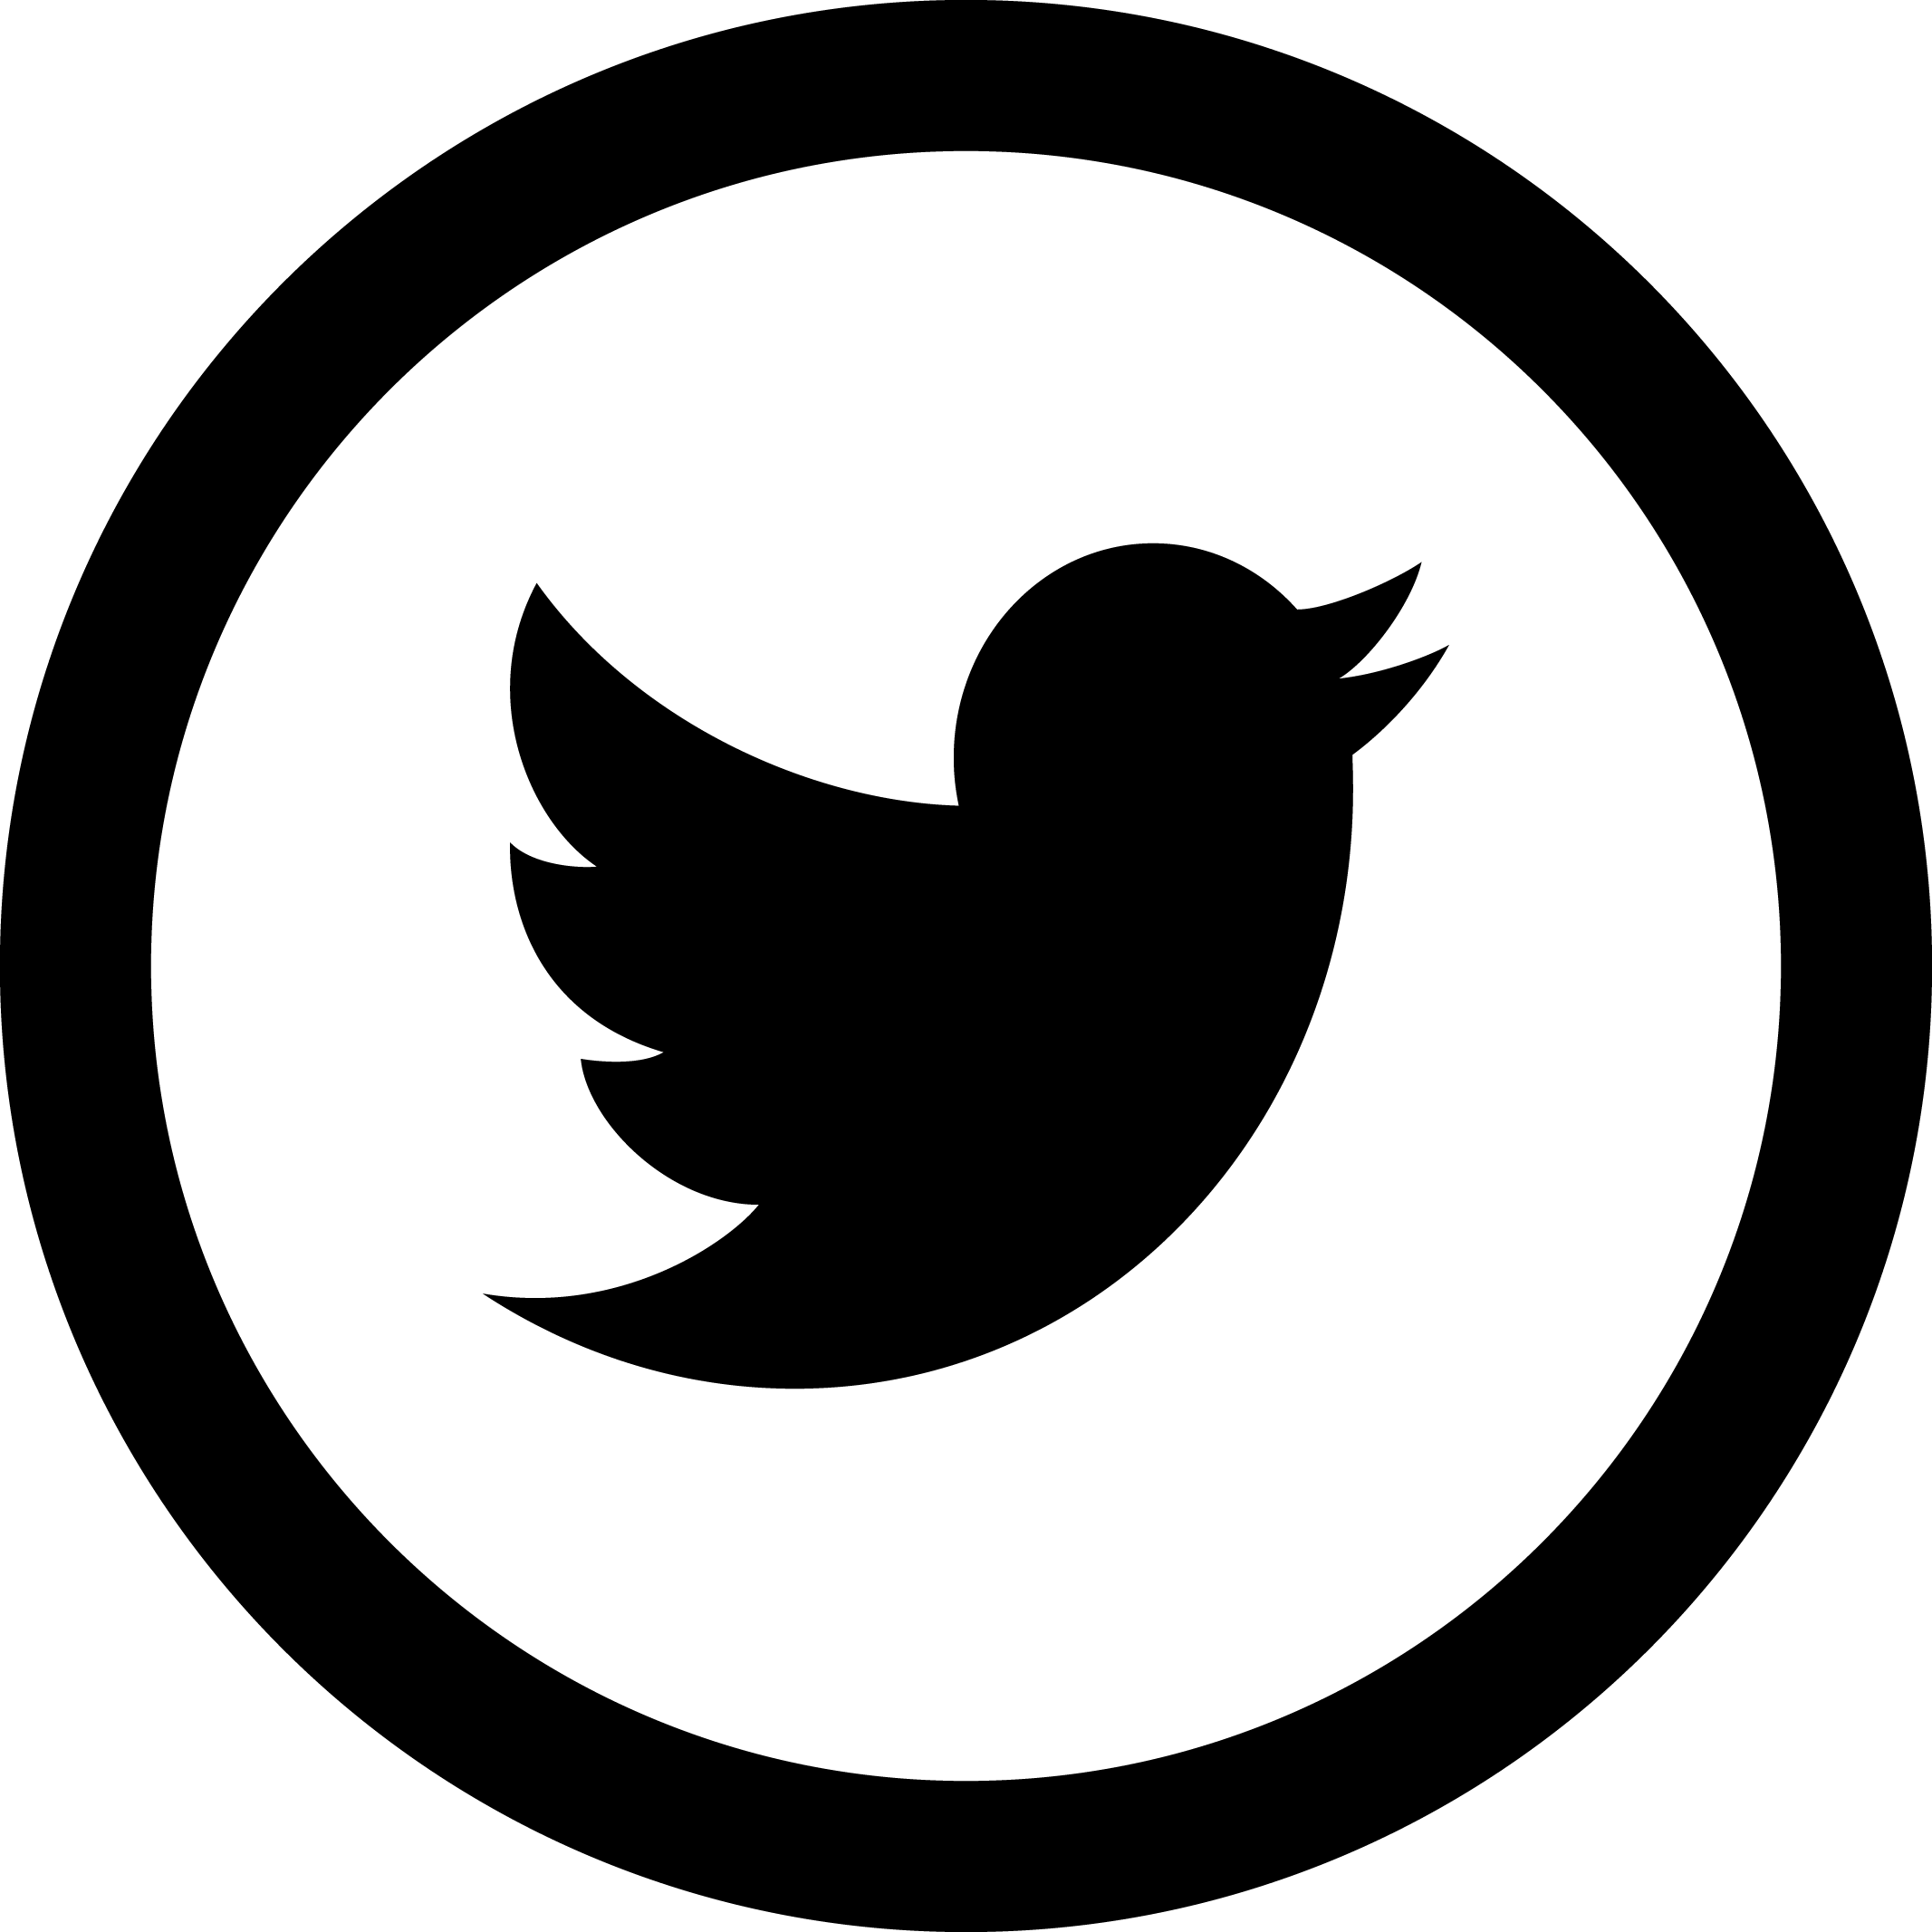 Black Twitter Logo - Twitter Icon In Black Circle transparent PNG - StickPNG